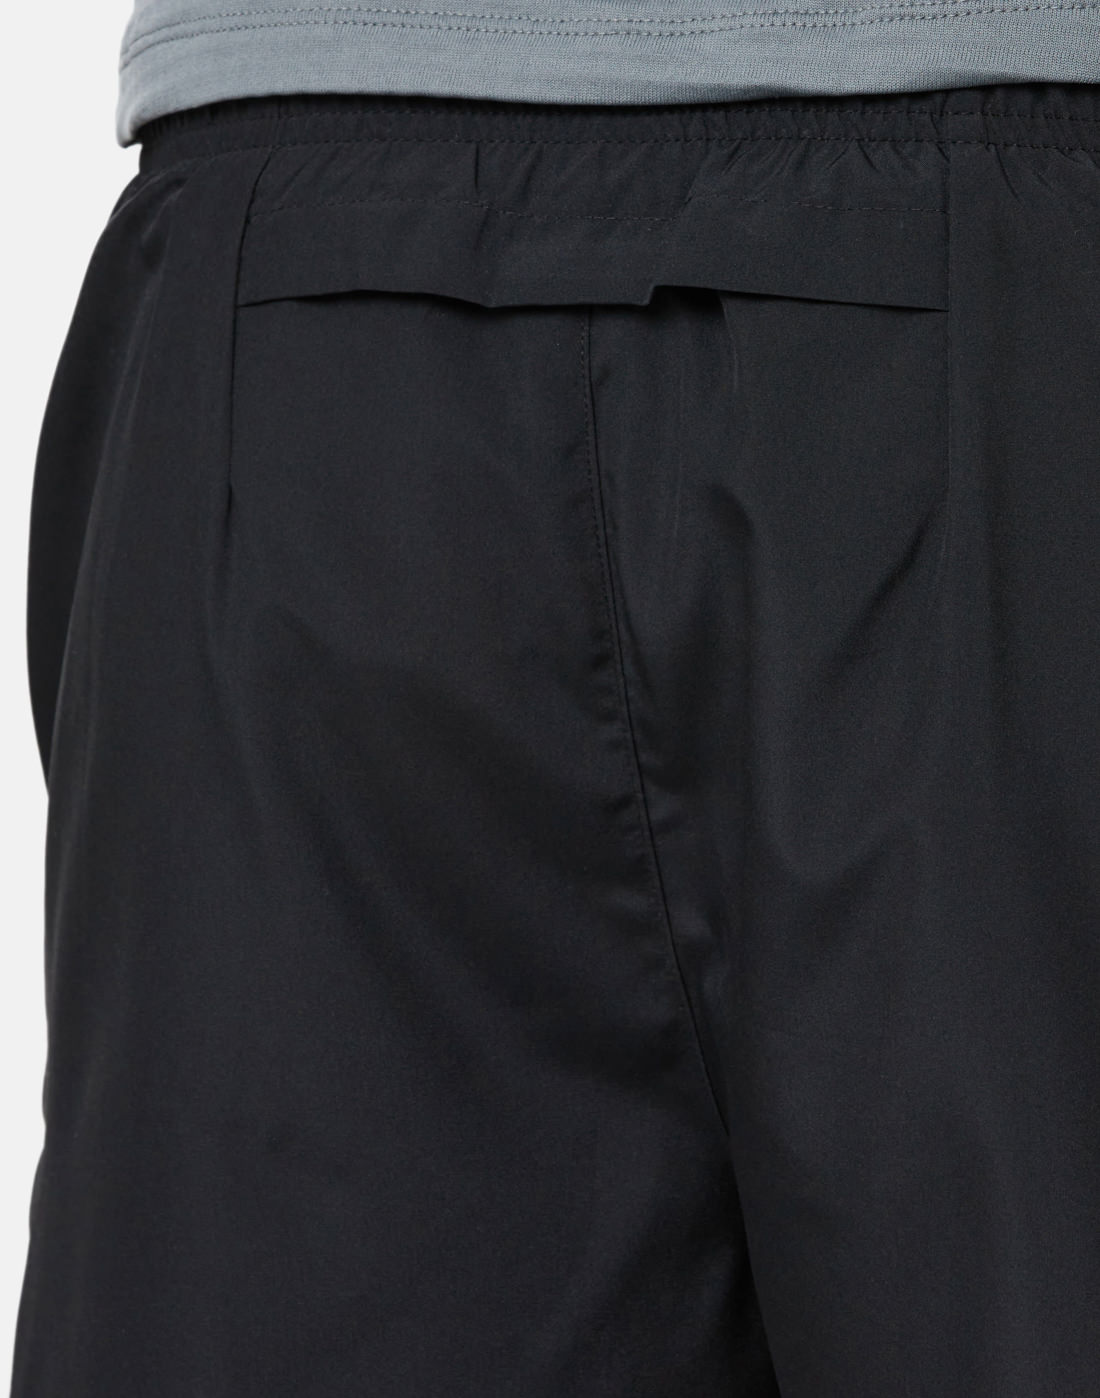 Nike Mens Challenger 5 Inch Shorts - Black | Life Style Sports IE